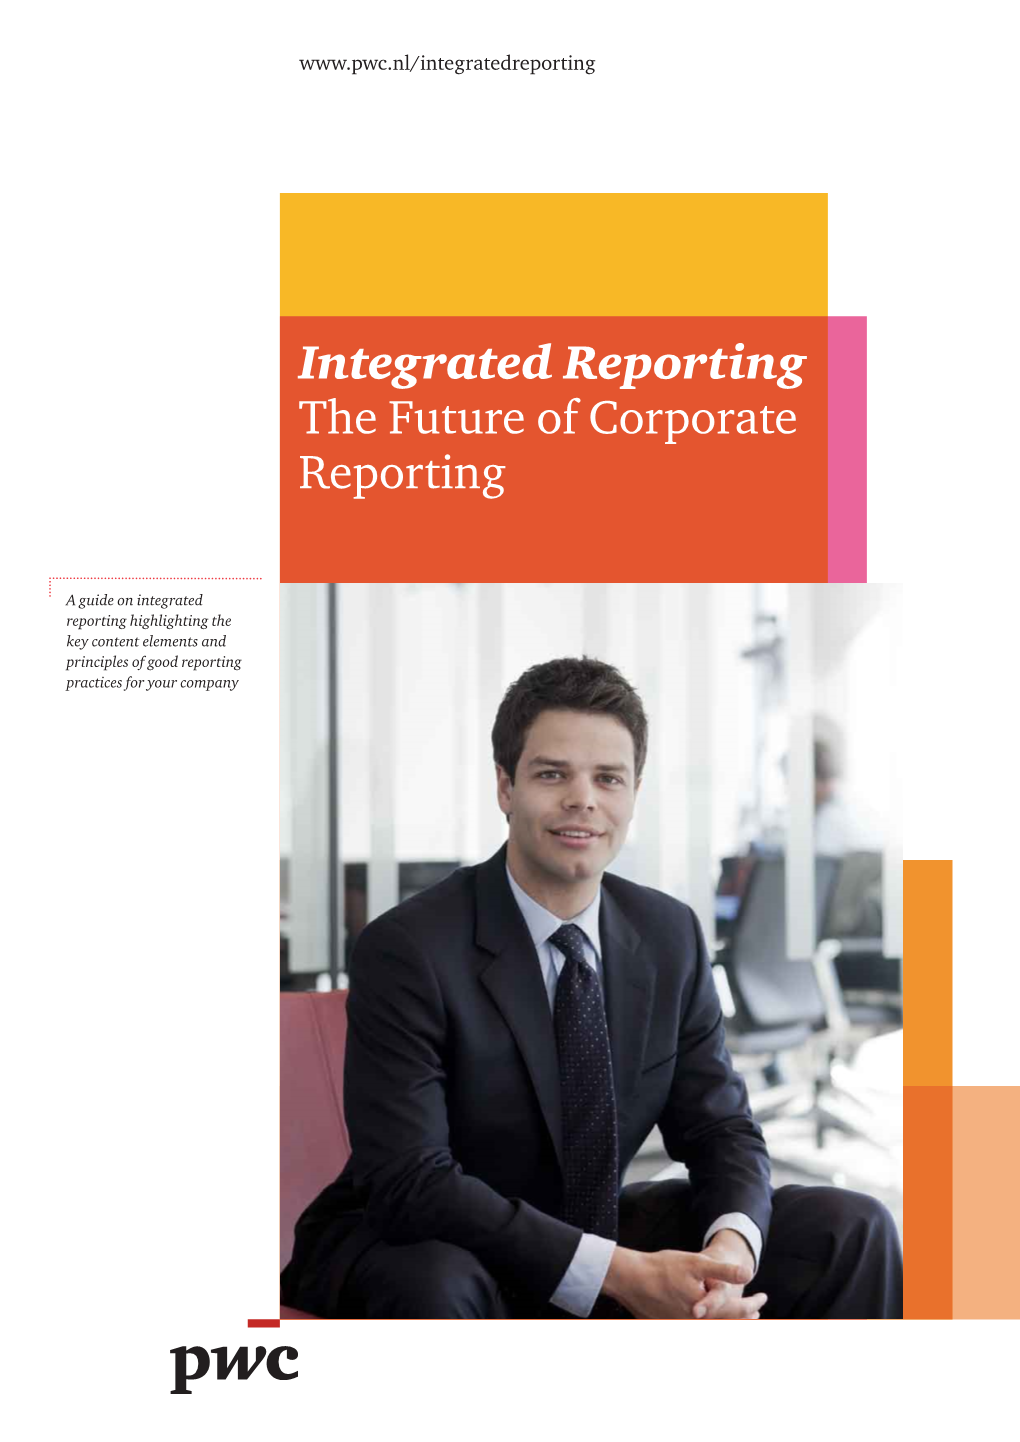 Integrated Reporting the Future of Corporate Reporting